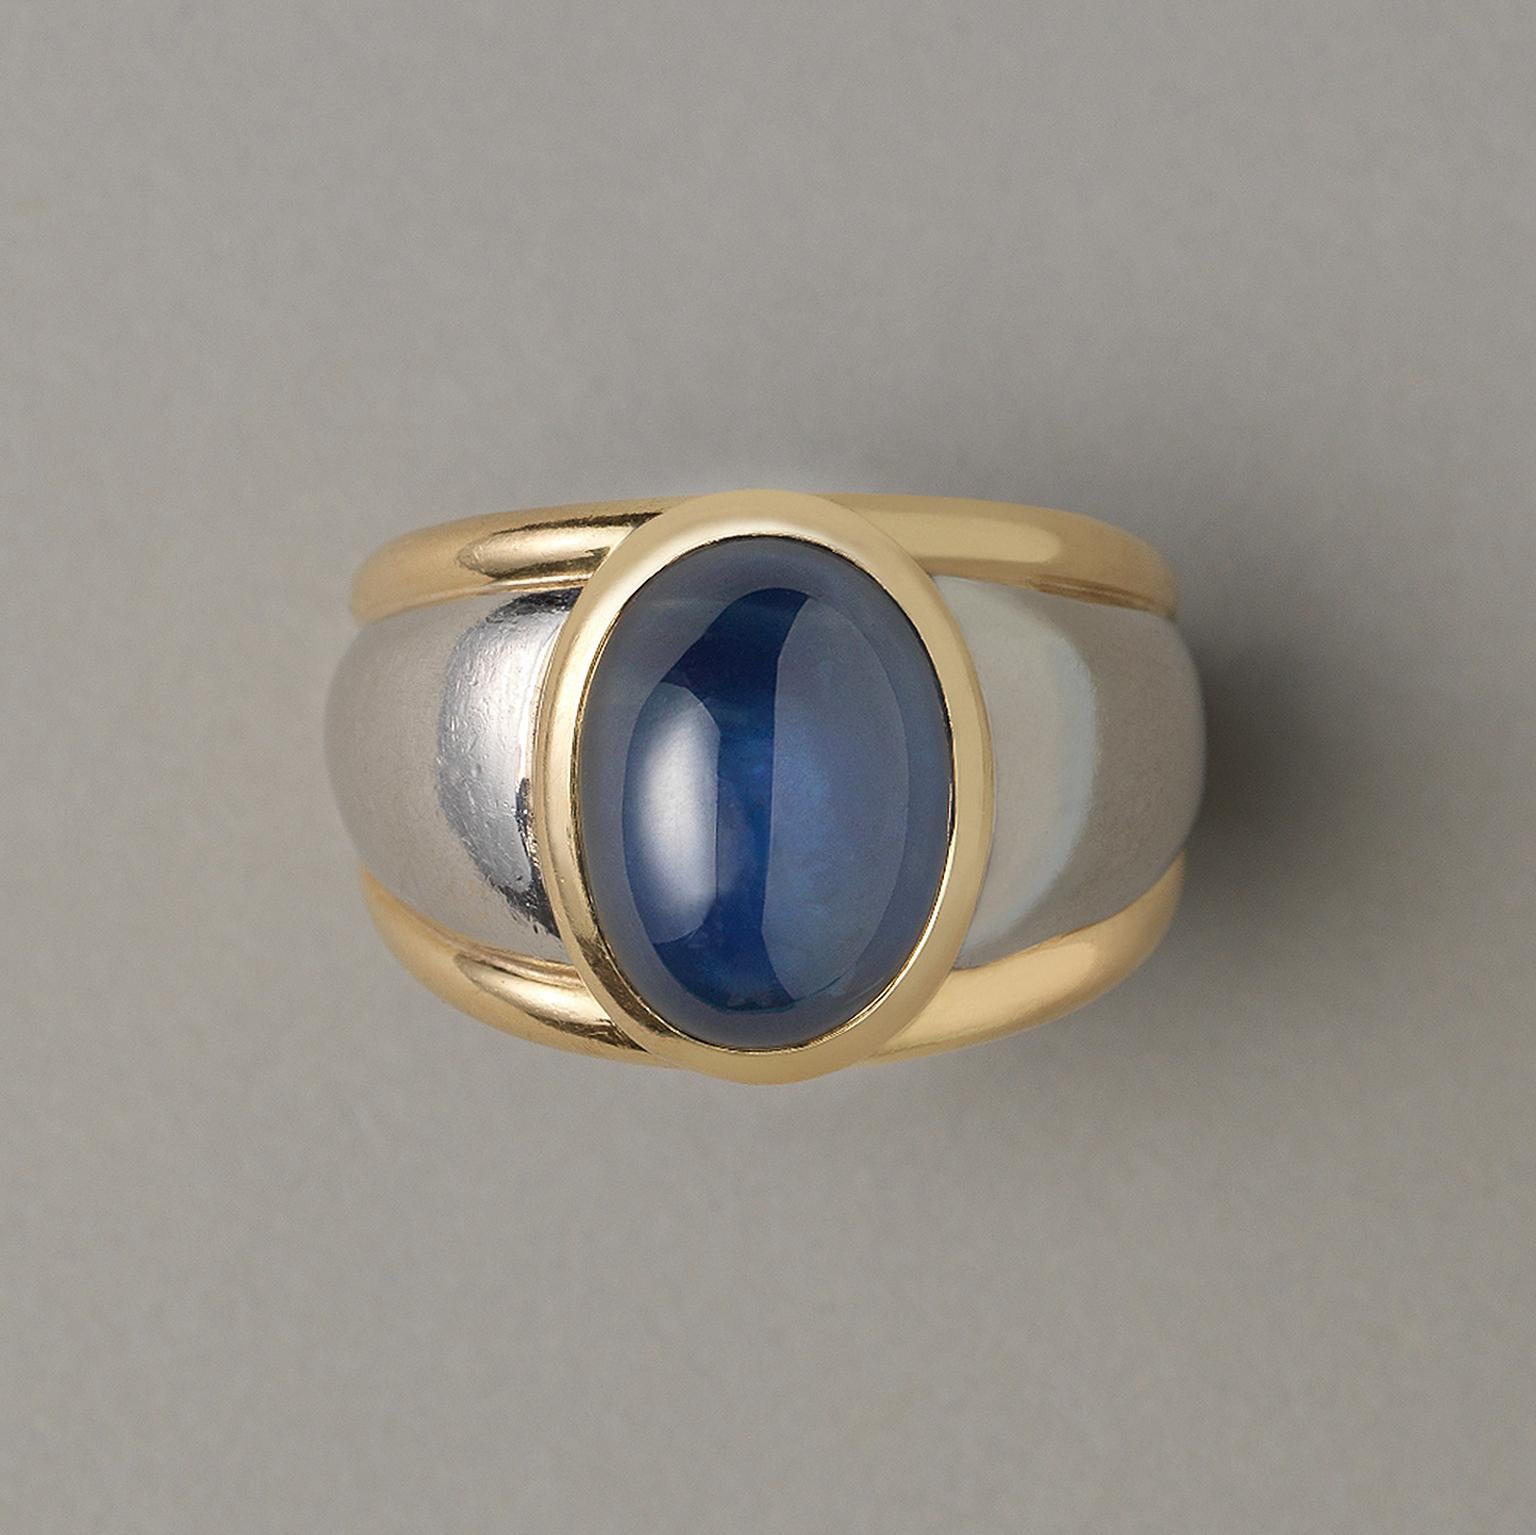 A large platinum and 18 carat yellow gold ring set with an oval cabochon cut natural untreated sapphire (app. 11.87 carat), France.

ring size: 18.25 mm / 8 US
weight: 18.54 grams